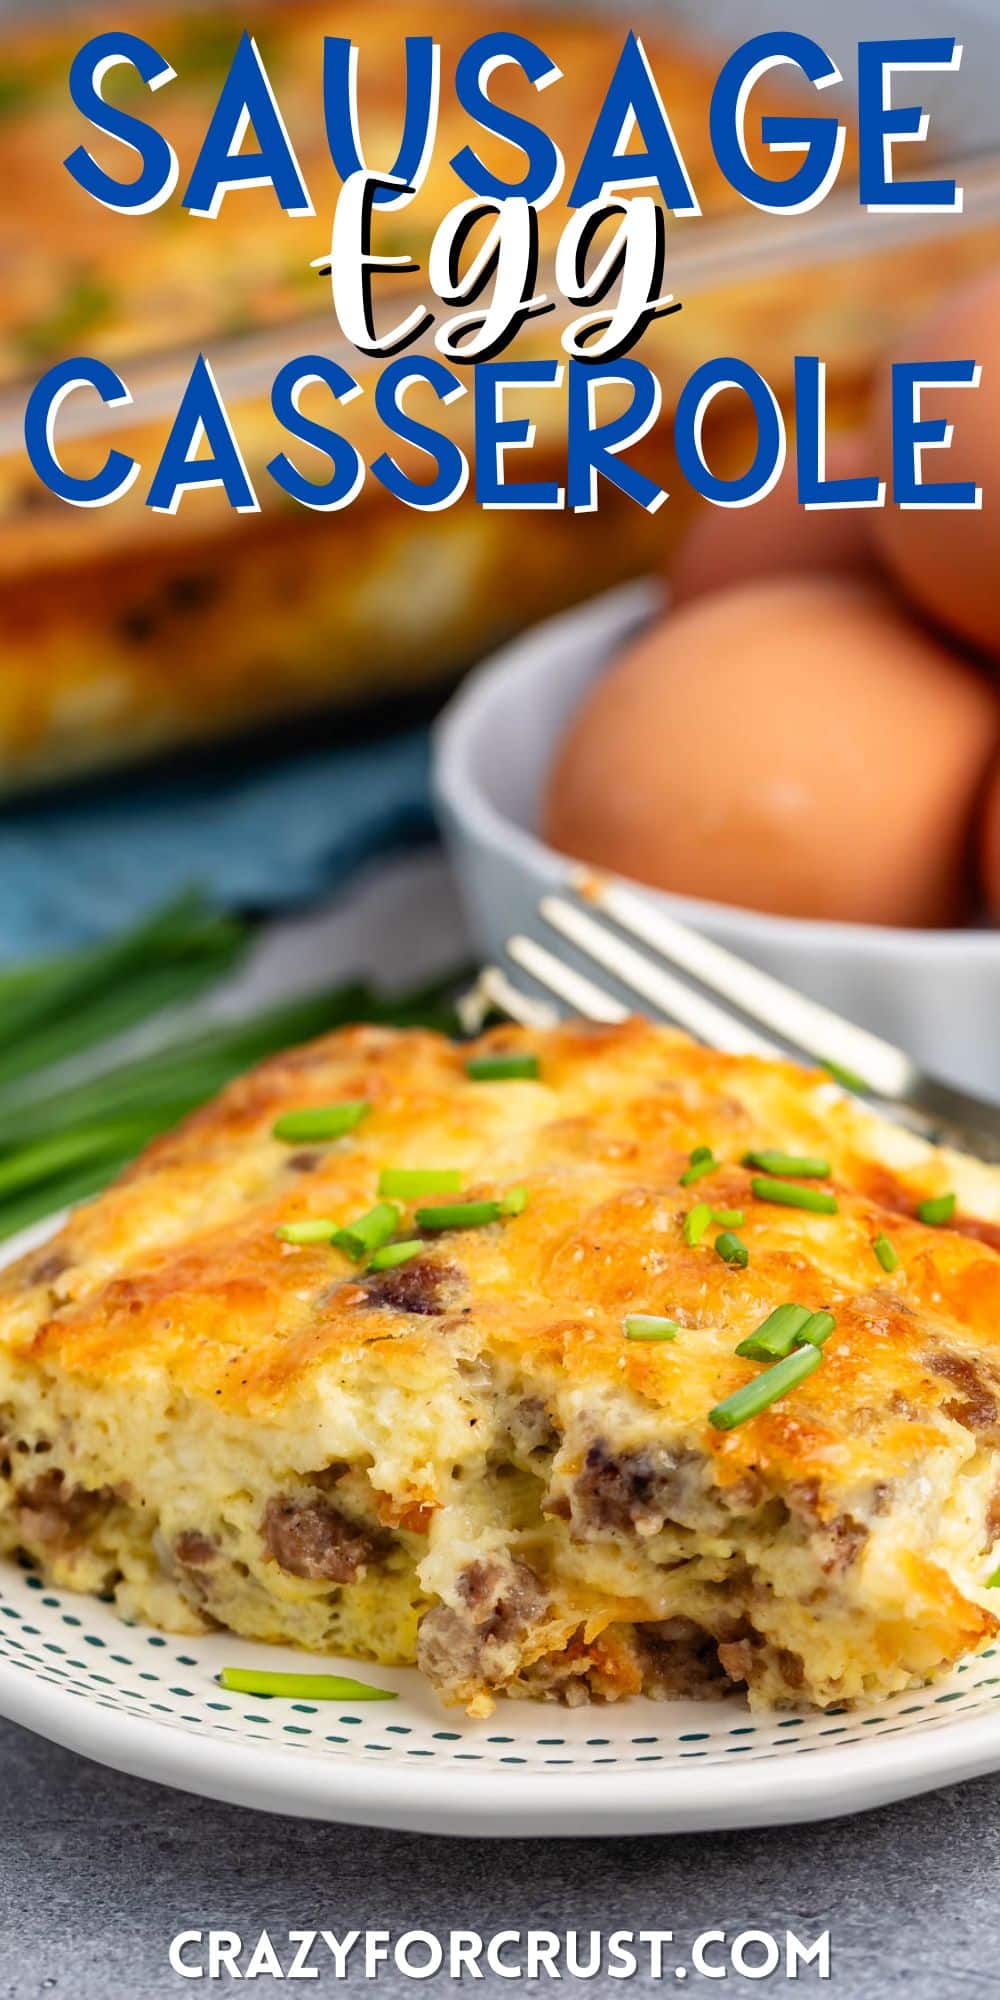 egg casserole with sausage baked in on a white plate with words on the image.